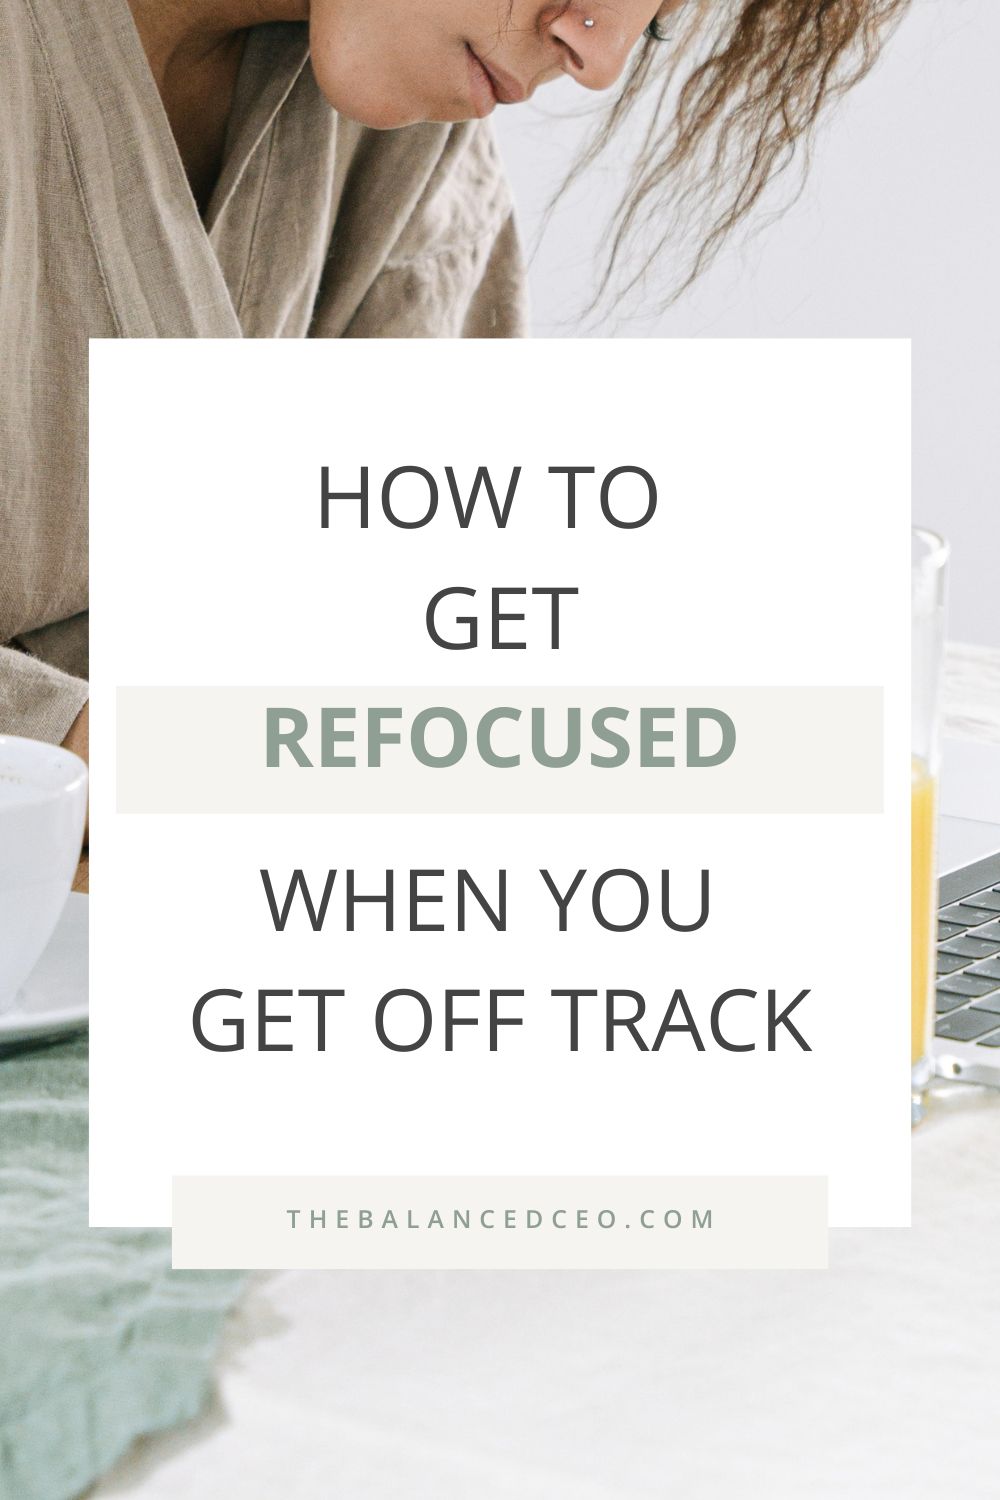 How to Get Refocused When You Get Off Track